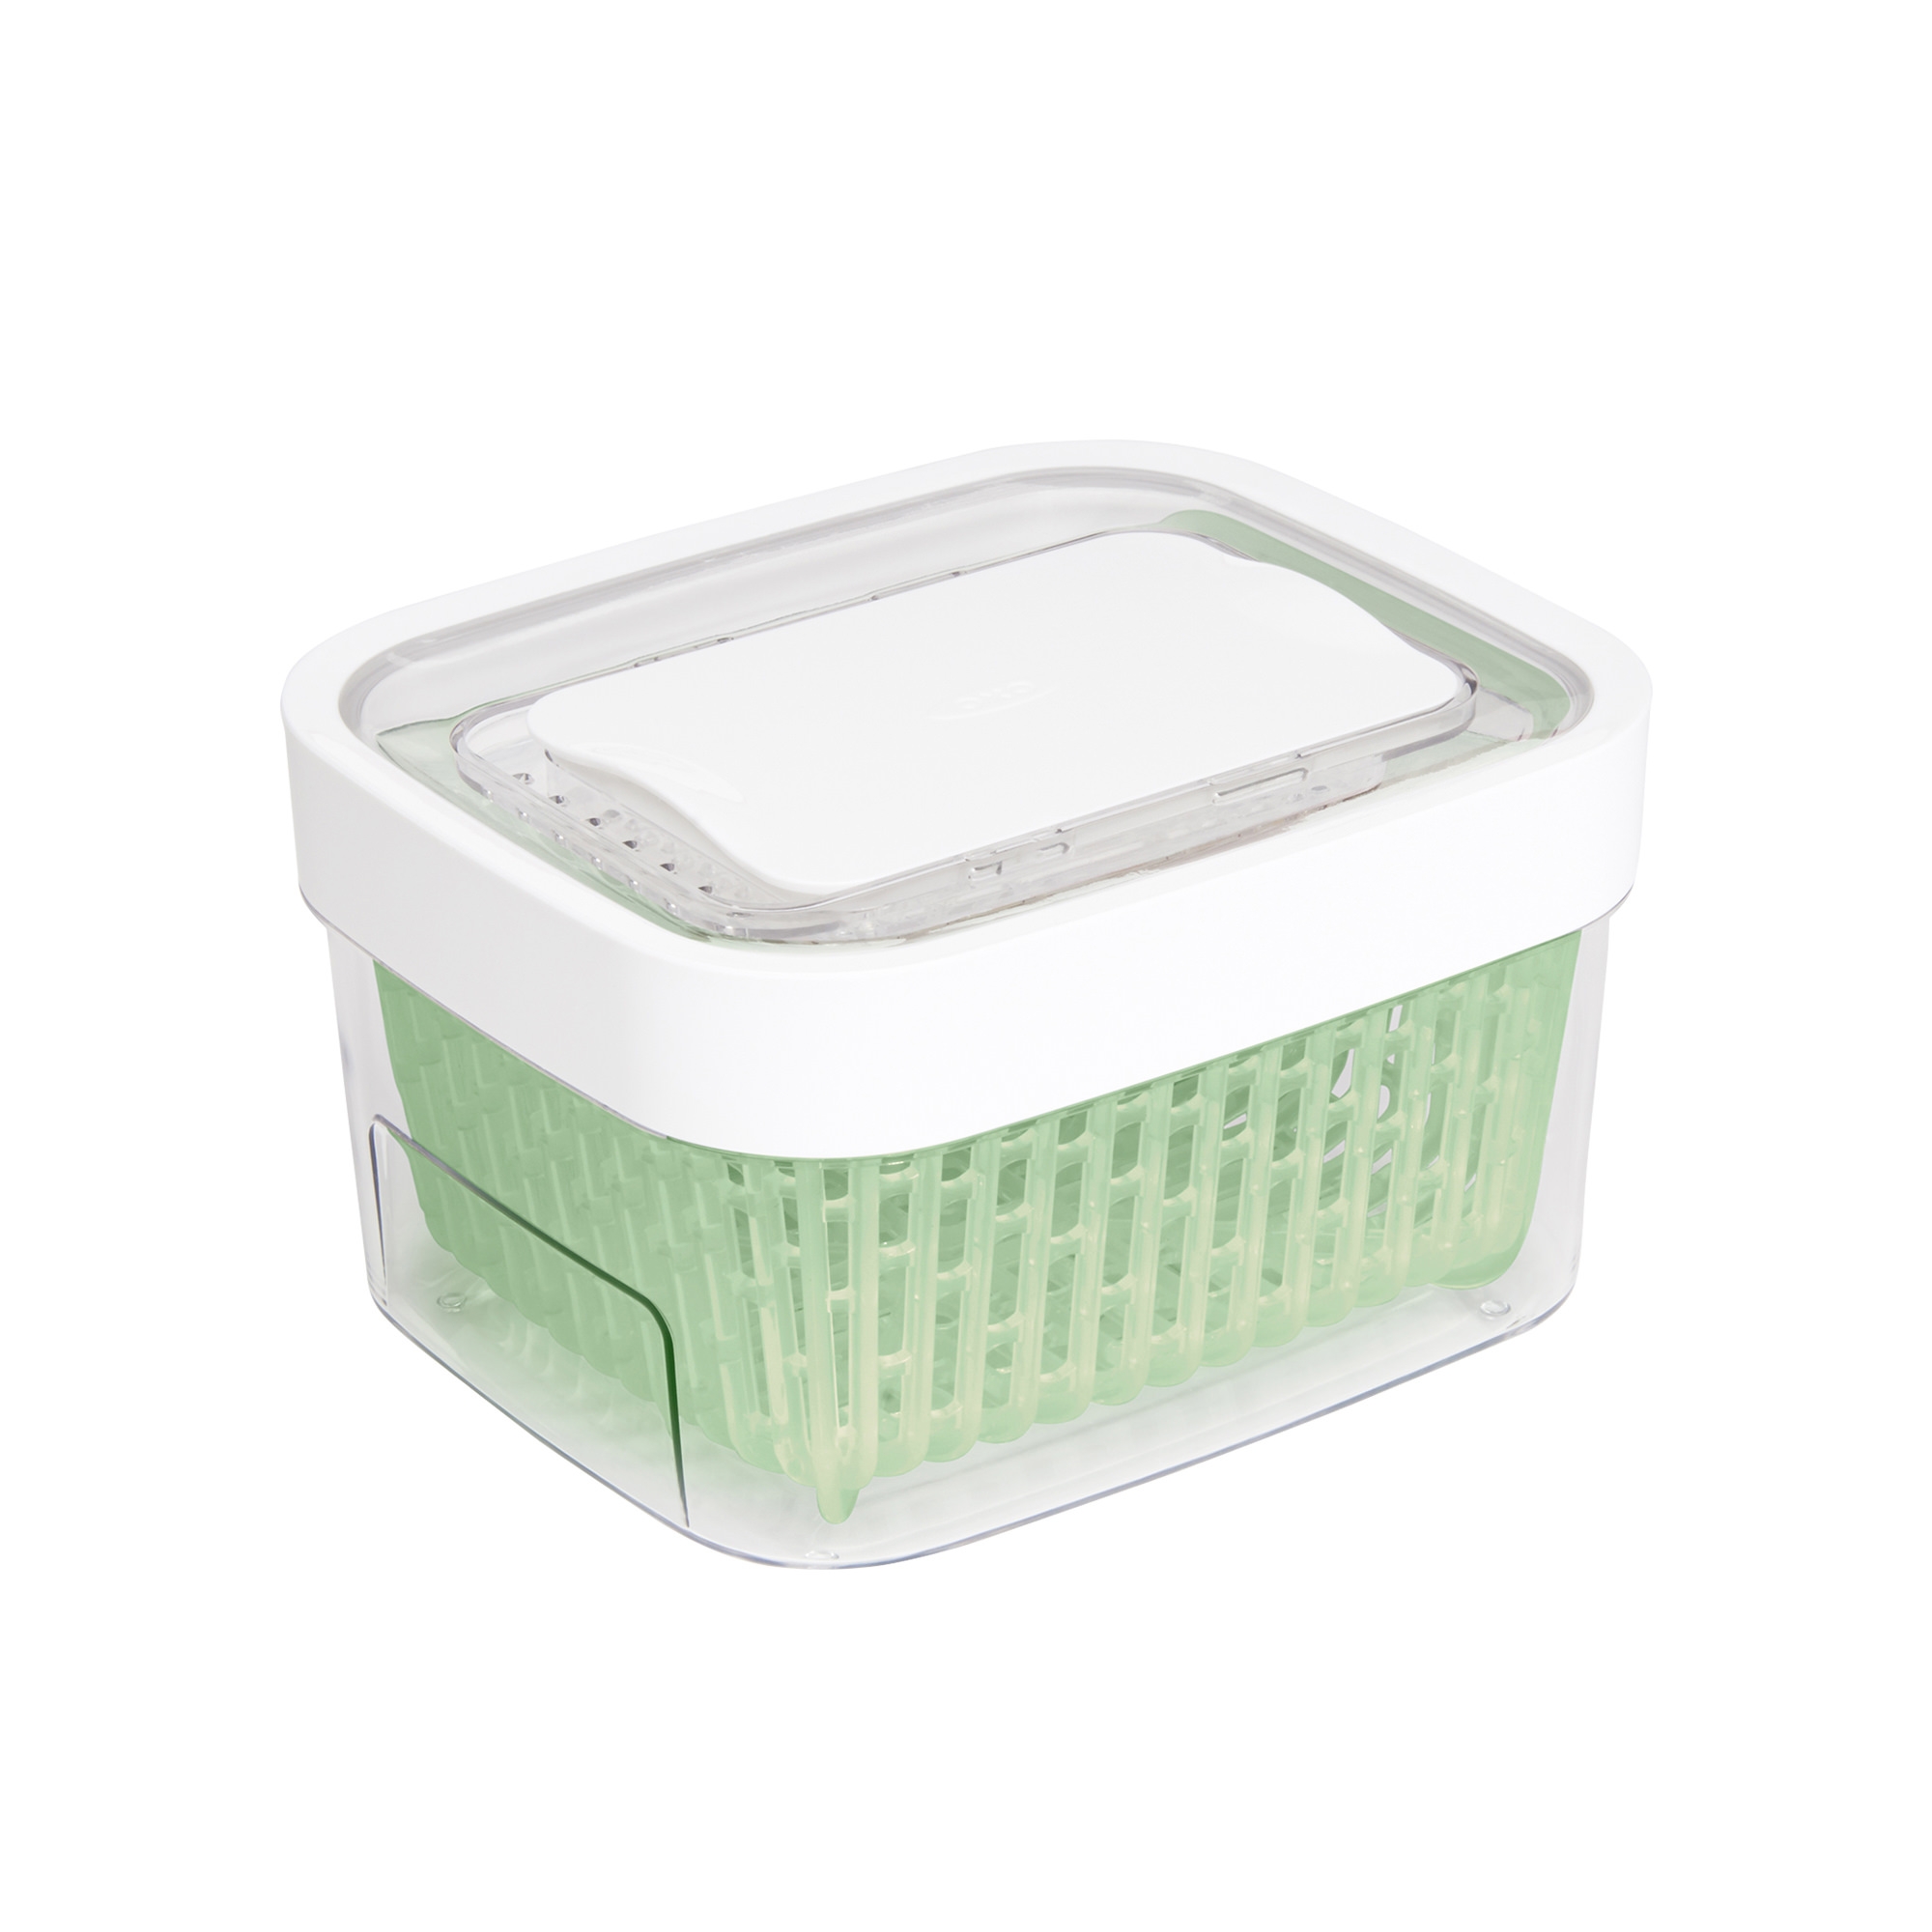 OXO Good Grips GreenSaver Produce Keeper 1.5L Image 1